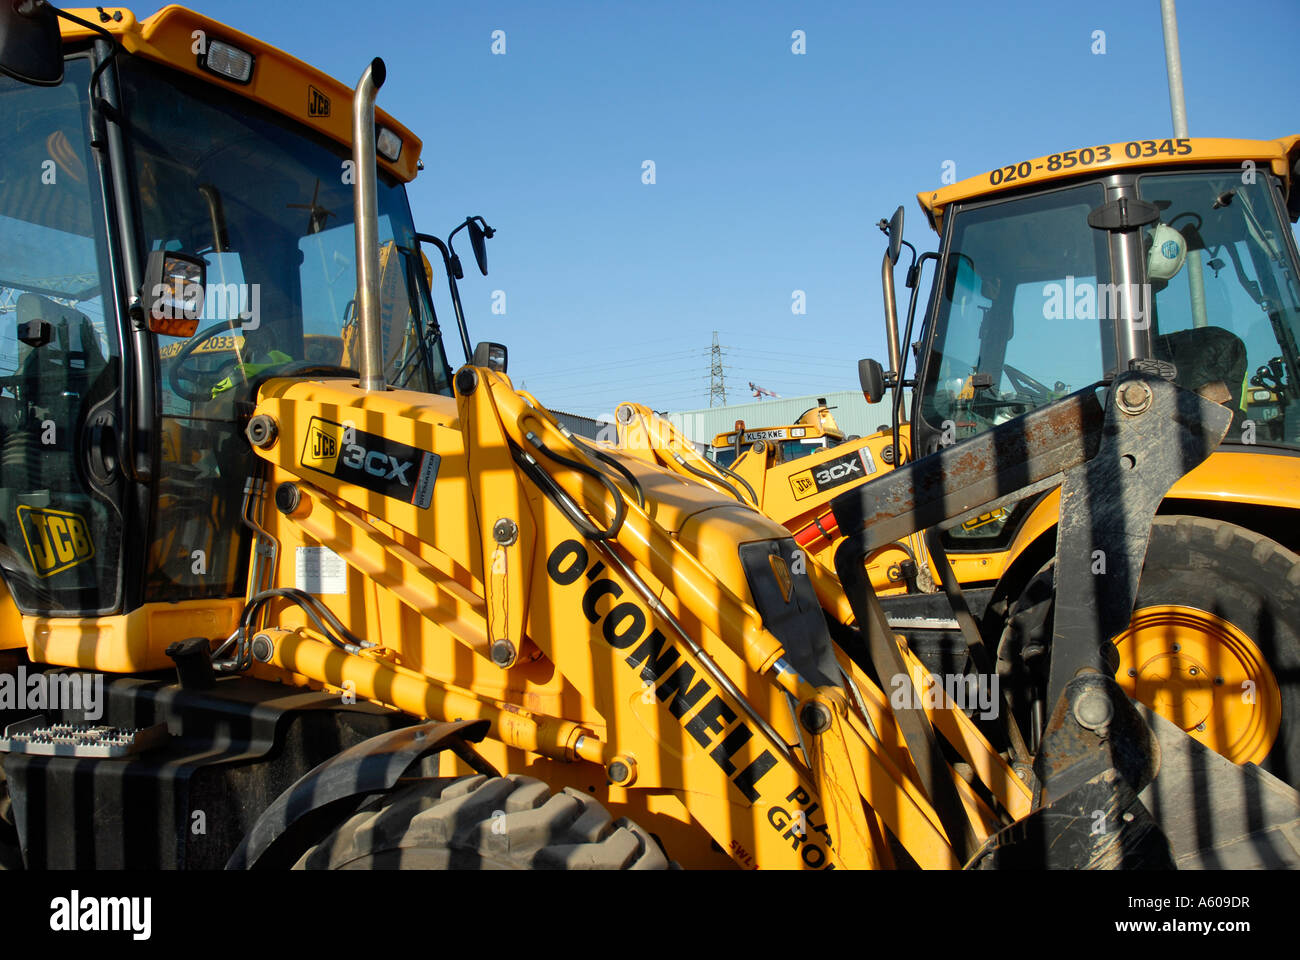 Construction vehicles in Stratford London in the area of the site of the 2012 Olympics Stock Photo